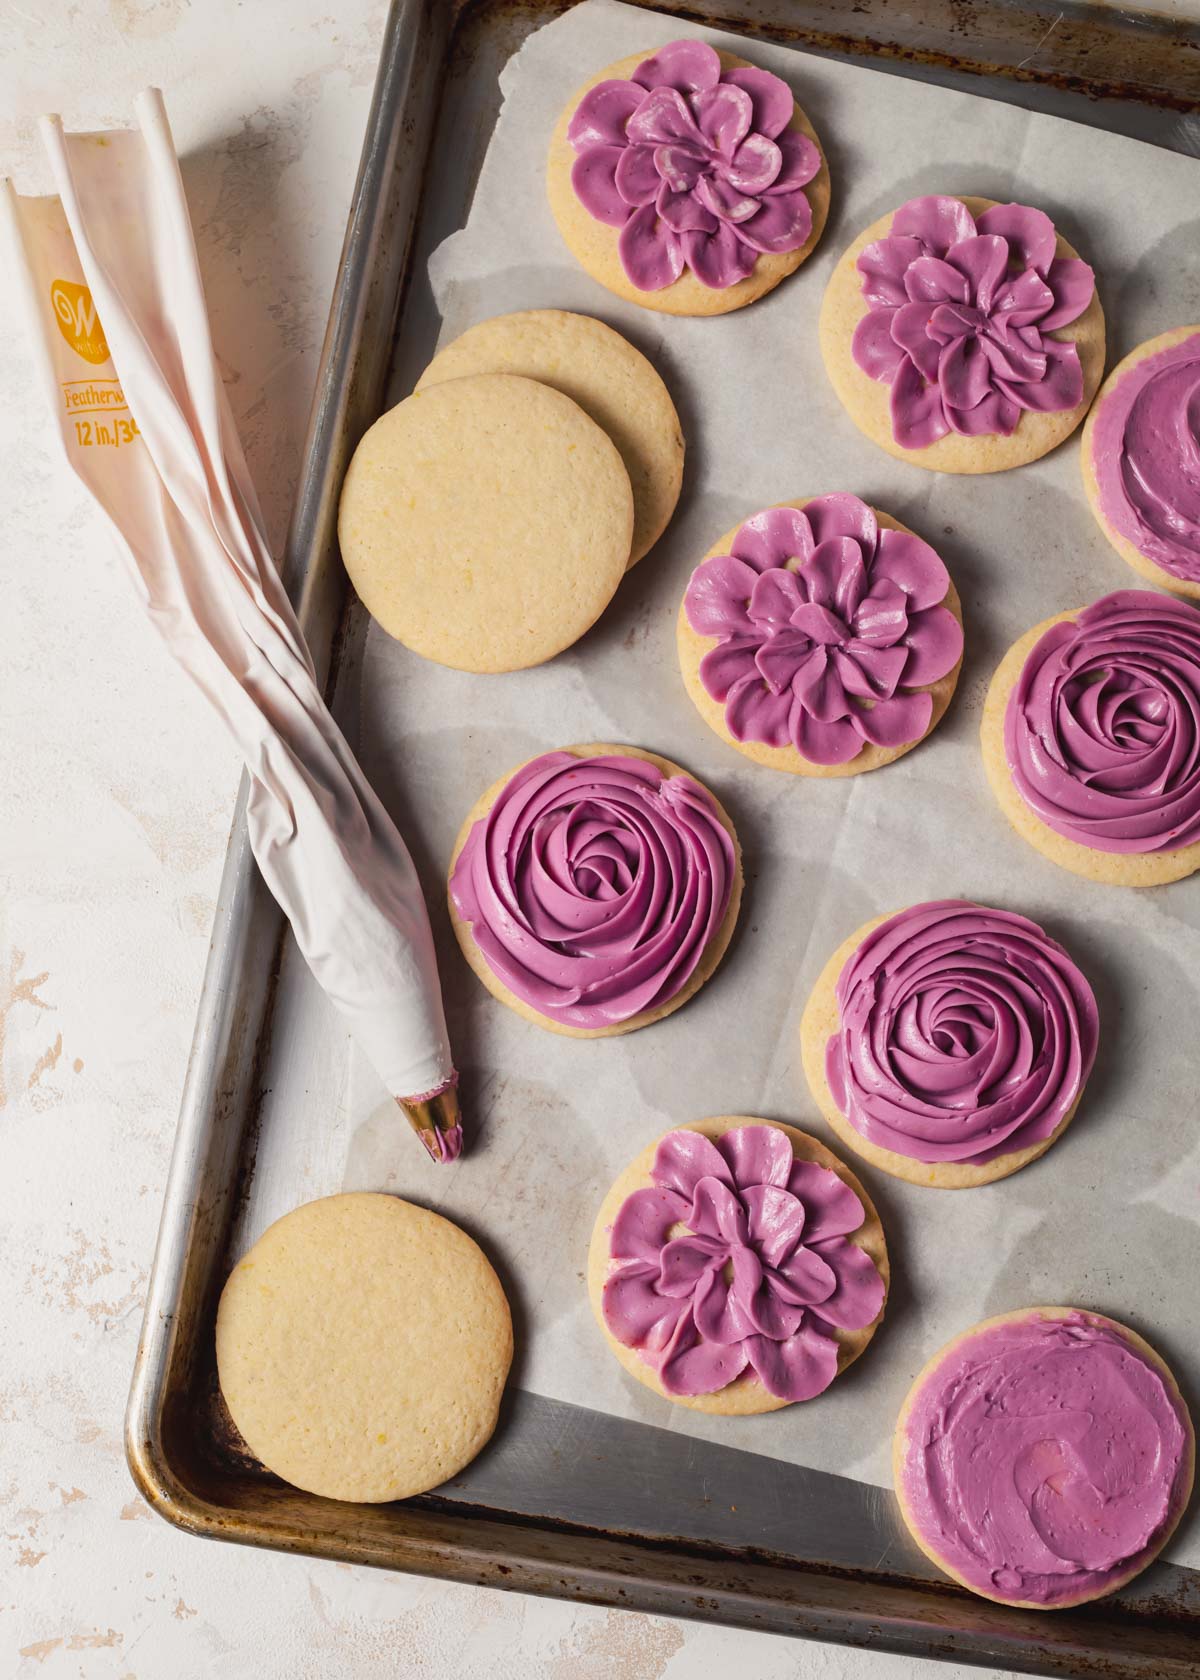 Piped buttercream on sugar cookies